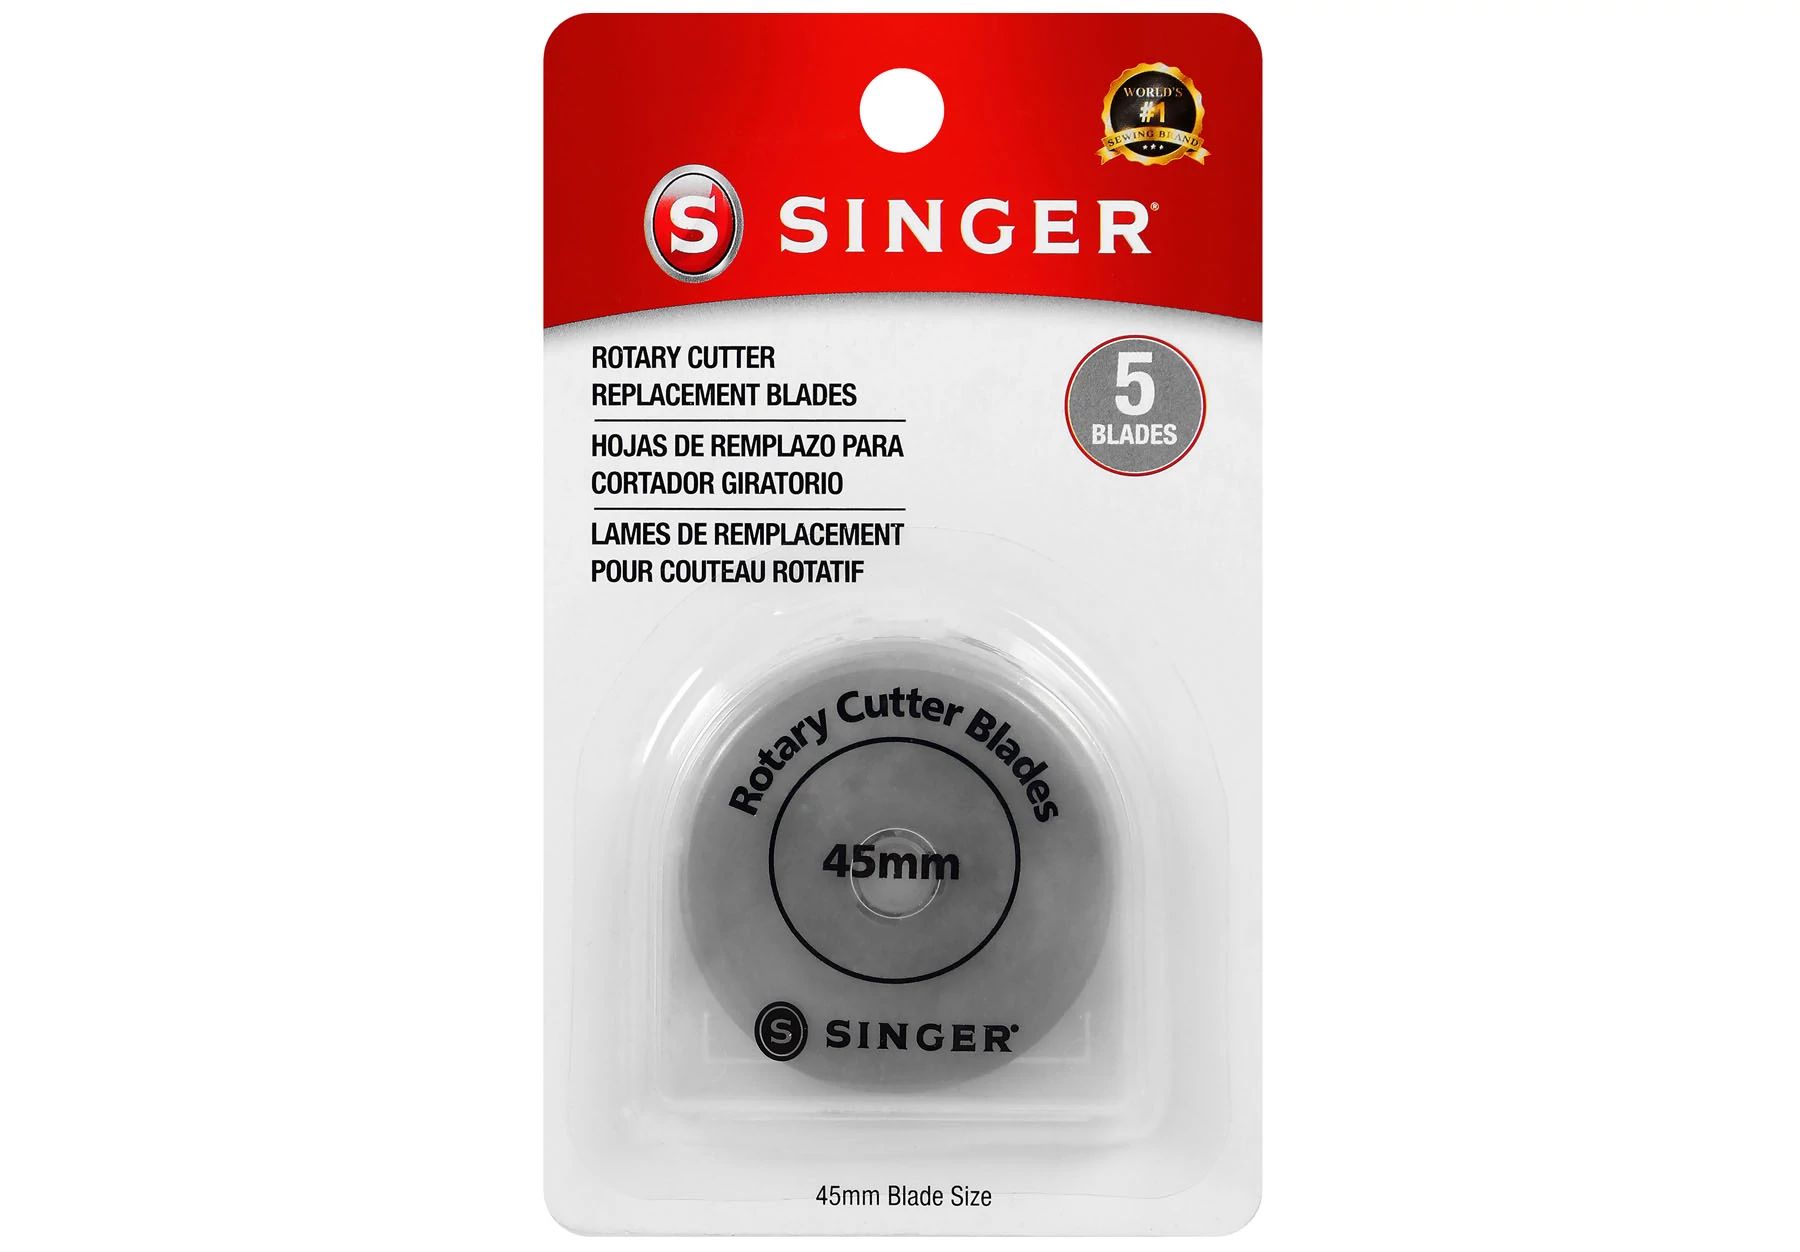 SINGER ProSeries Rotary Cutter Replacement Blades 5-Count